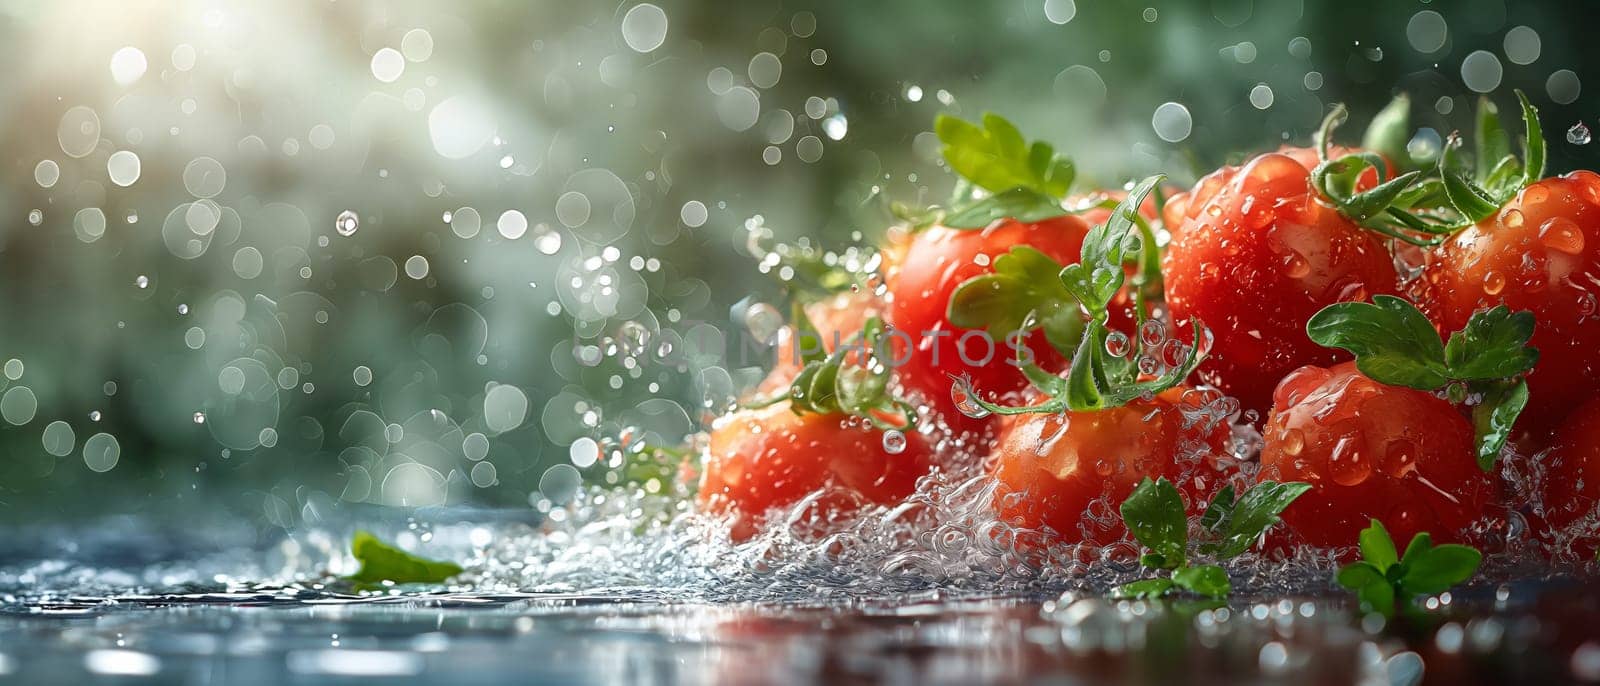 Water Splashes on Tomatoes. by Fischeron